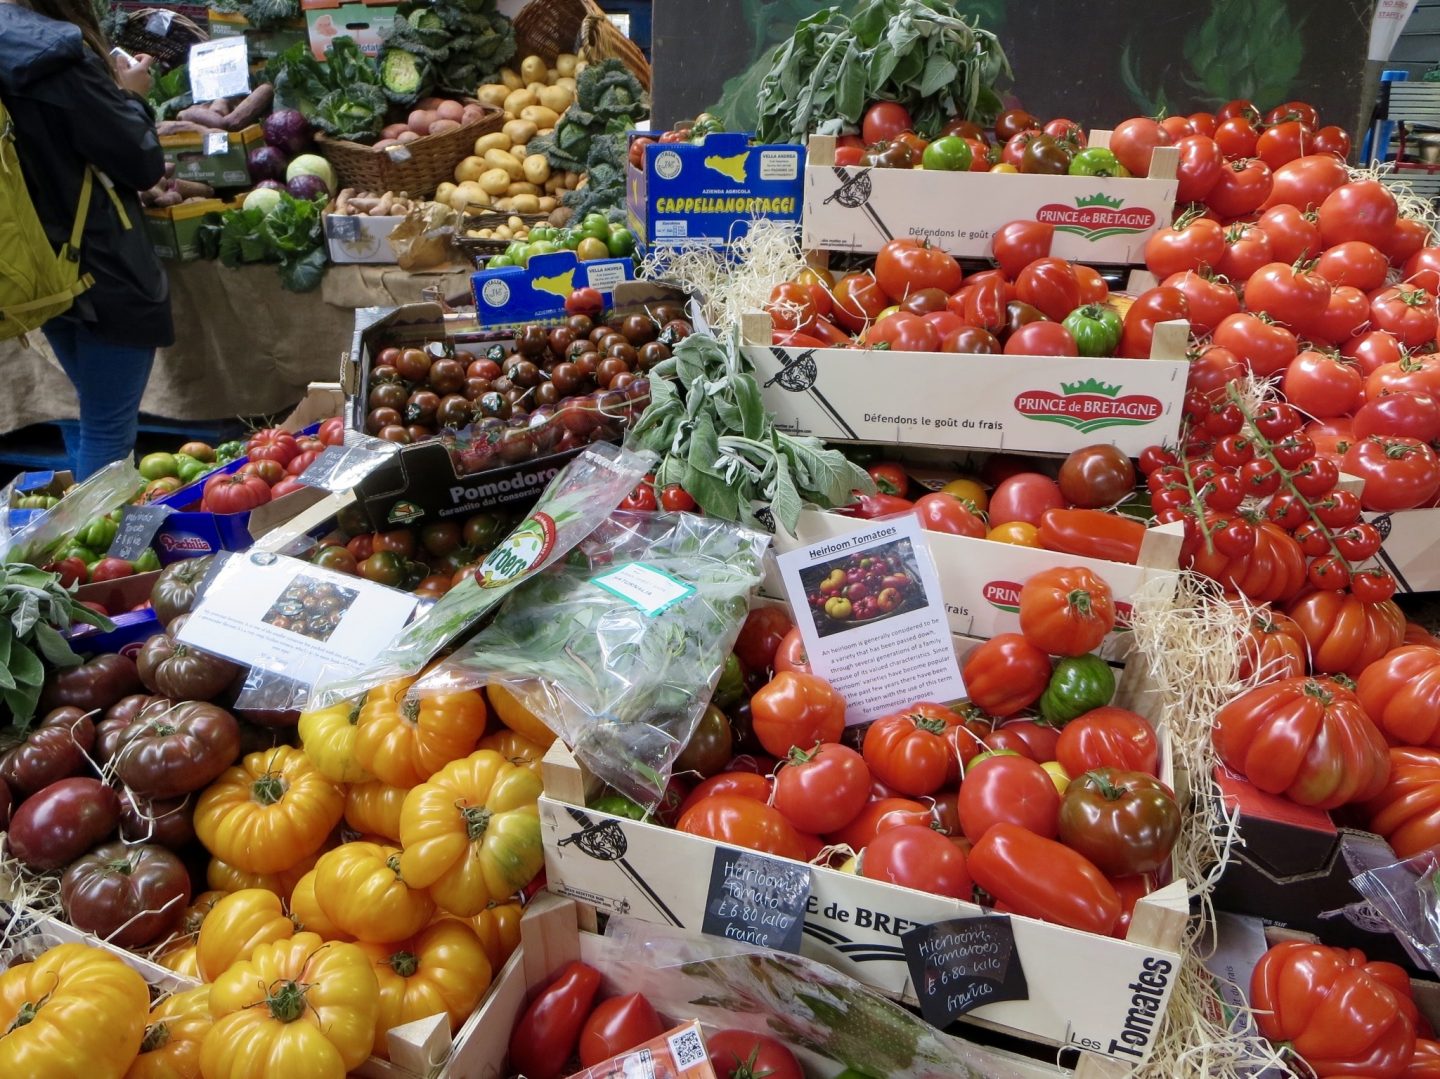 Many varieties of heirloom tomatoes at the Borough Market in London